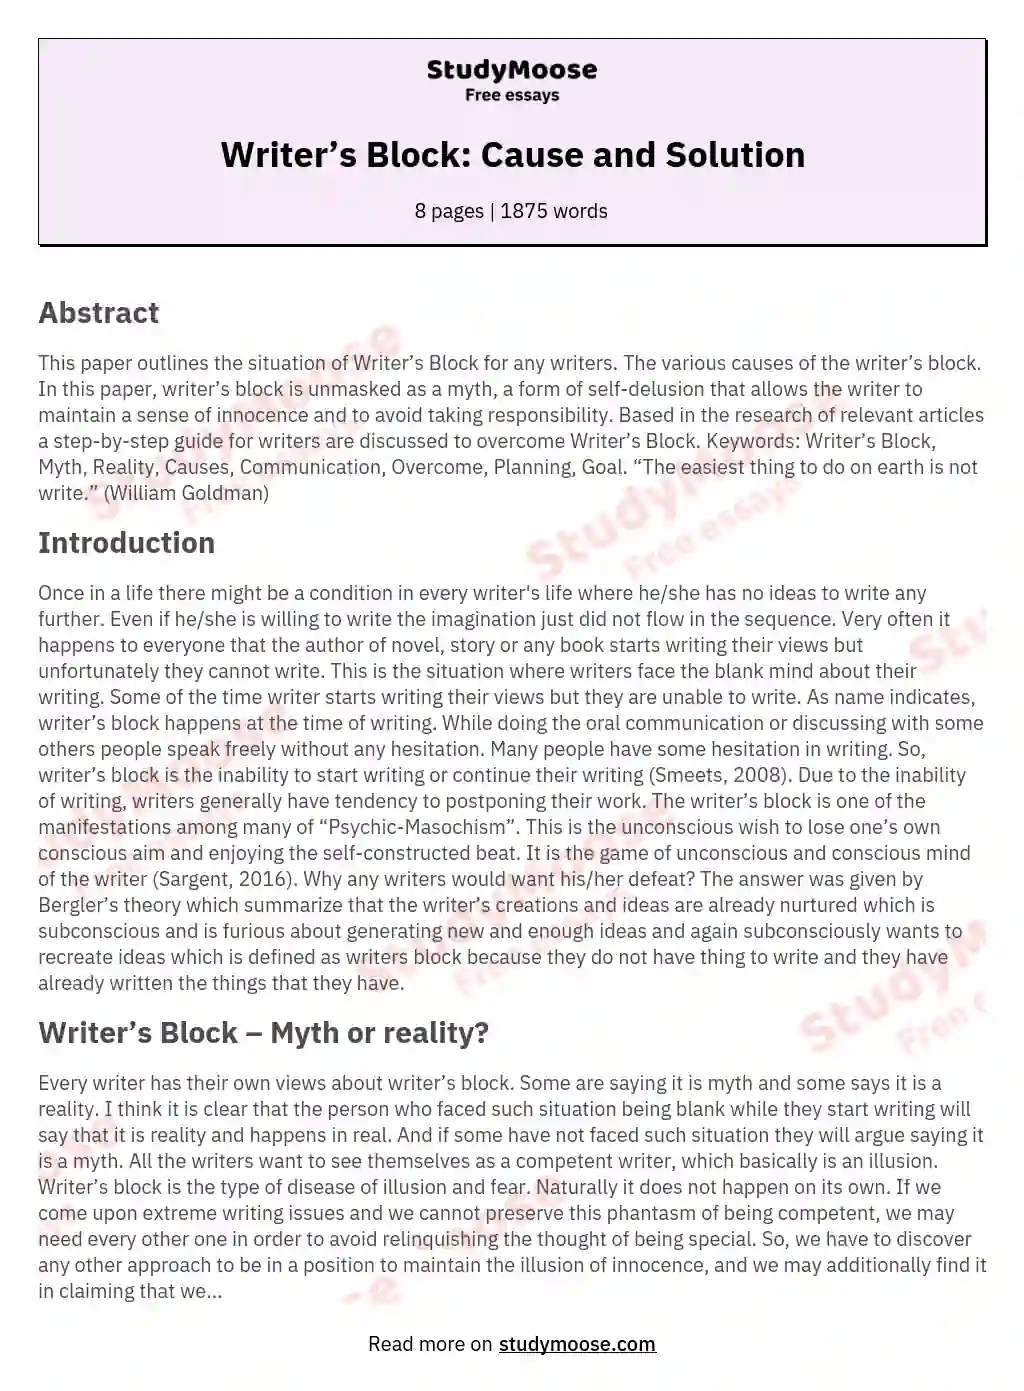 Writer’s Block: Cause and Solution essay